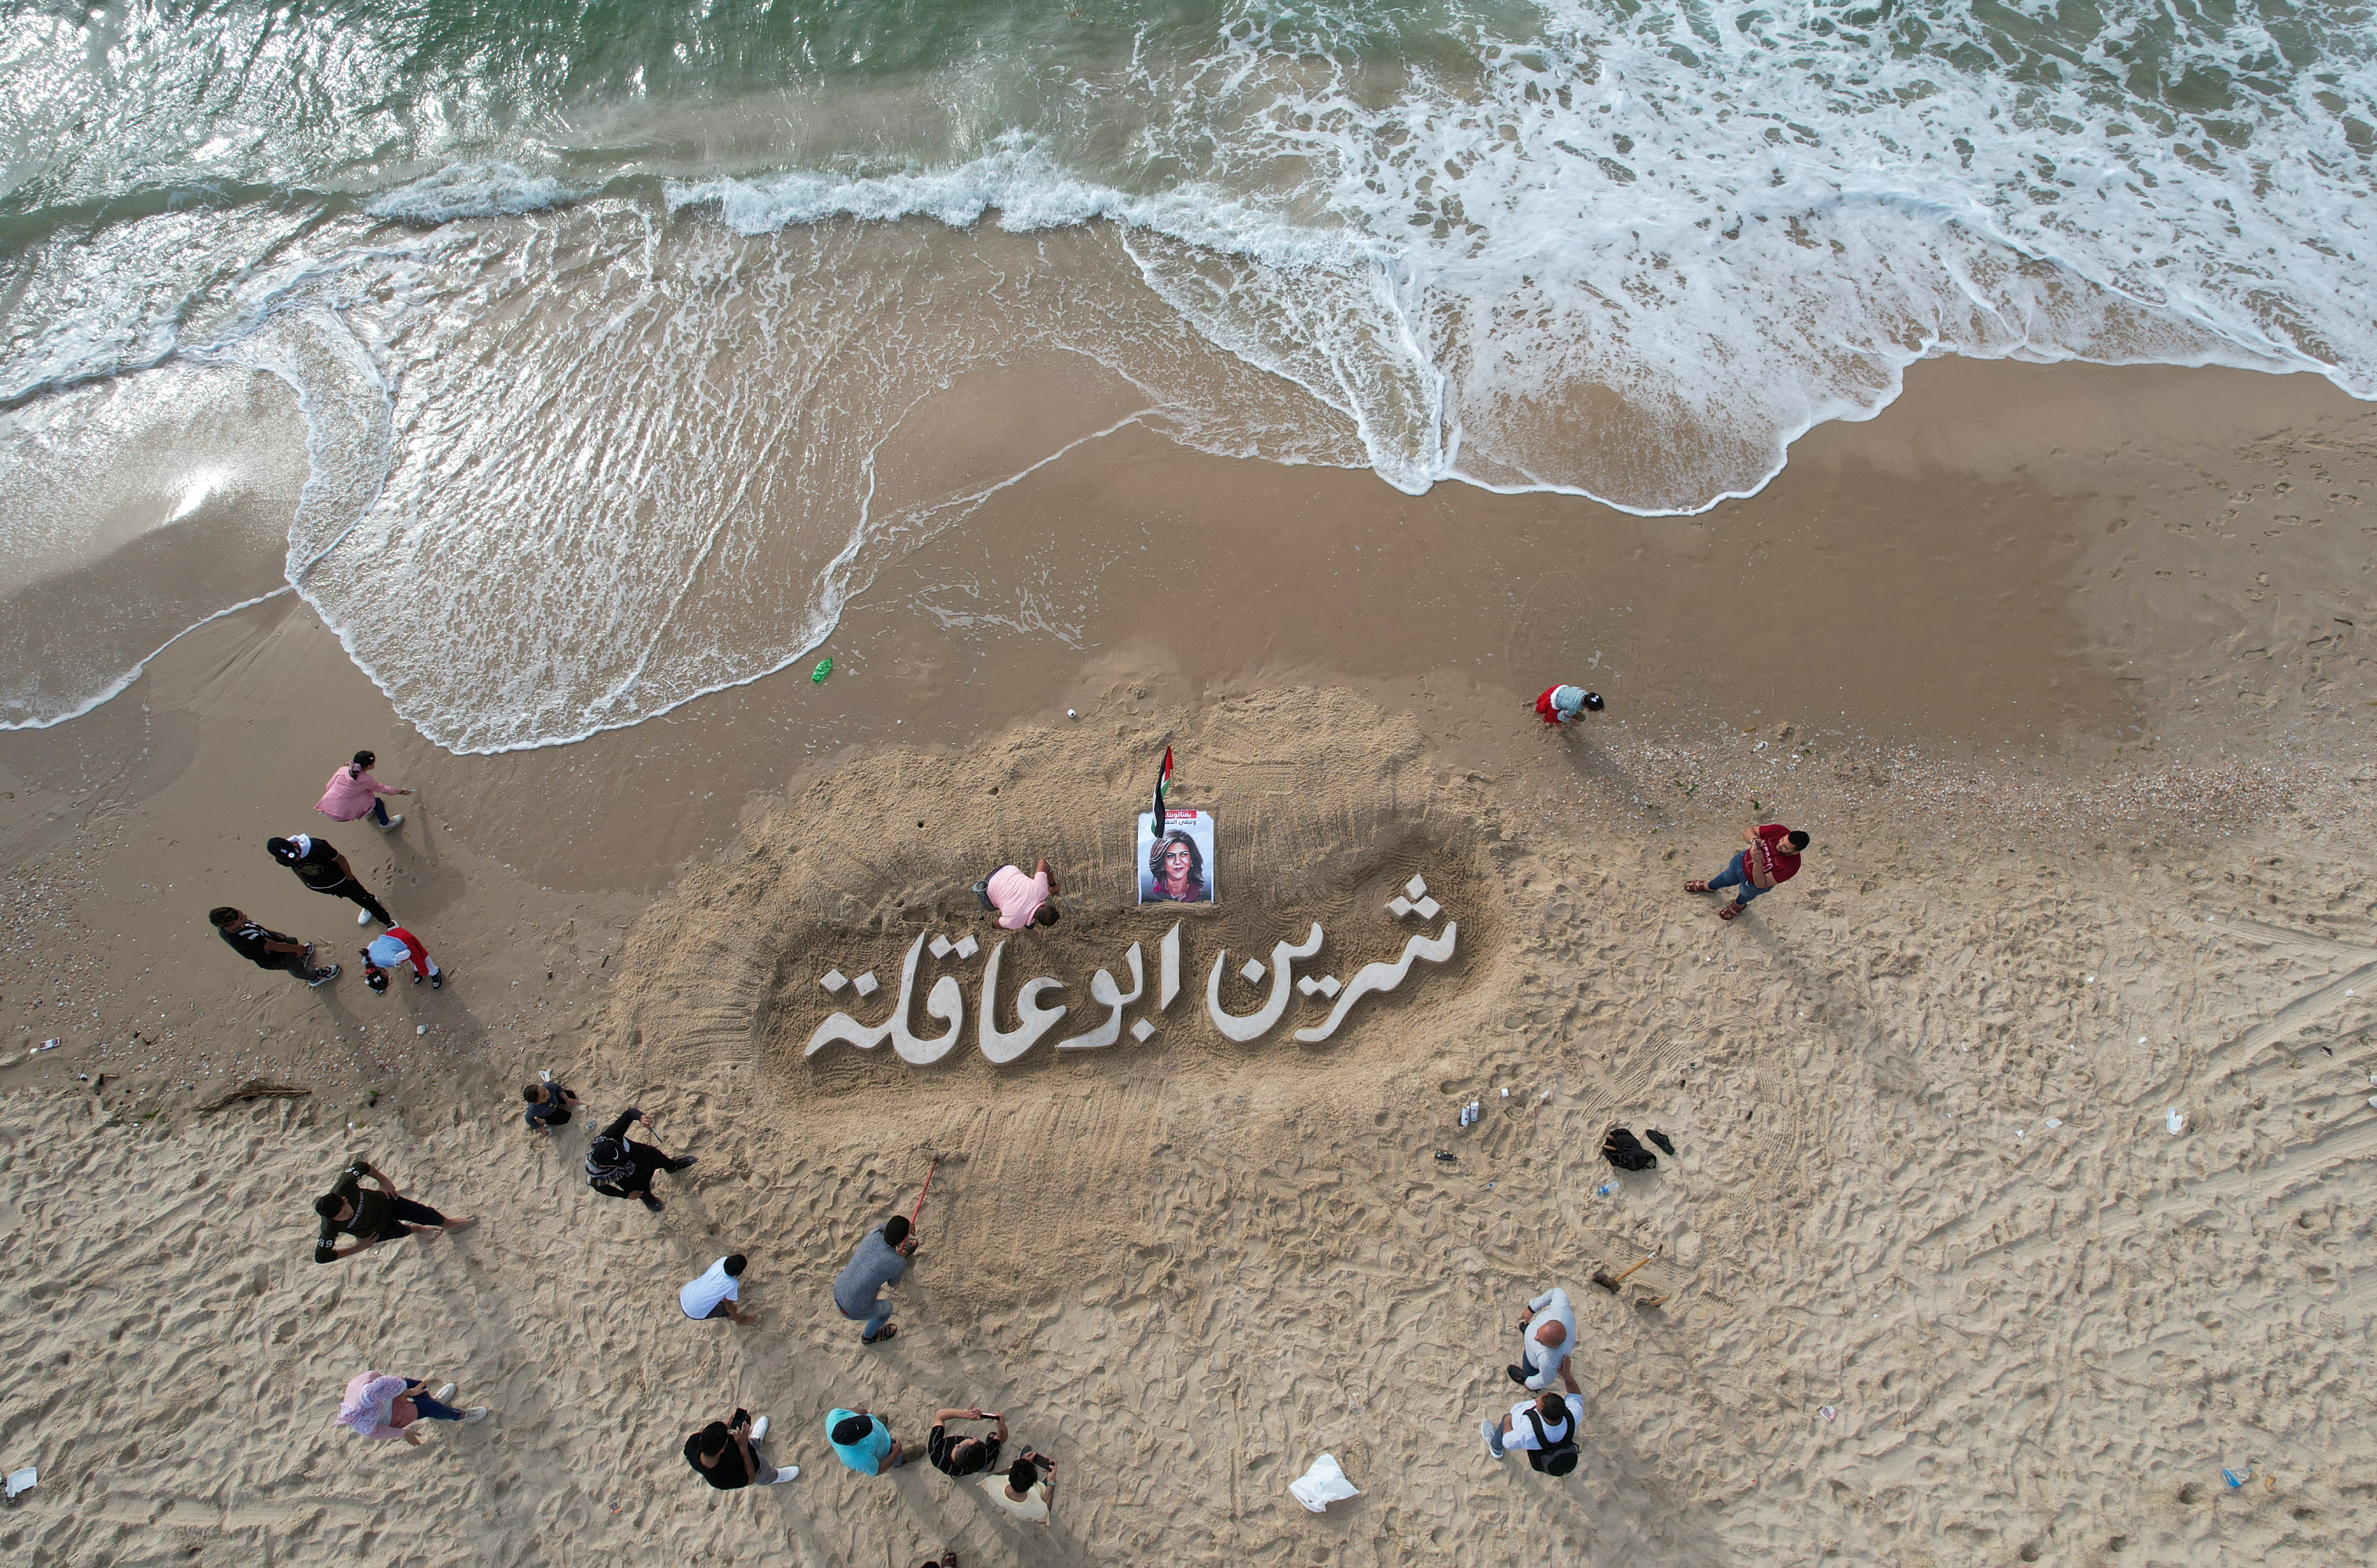 A sand sculpture reads "Shireen Abu Akleh", for the Al Jazeera reporter who was killed in an Israeli raid in the Israeli-occupied West Bank, on a beach in Gaza City